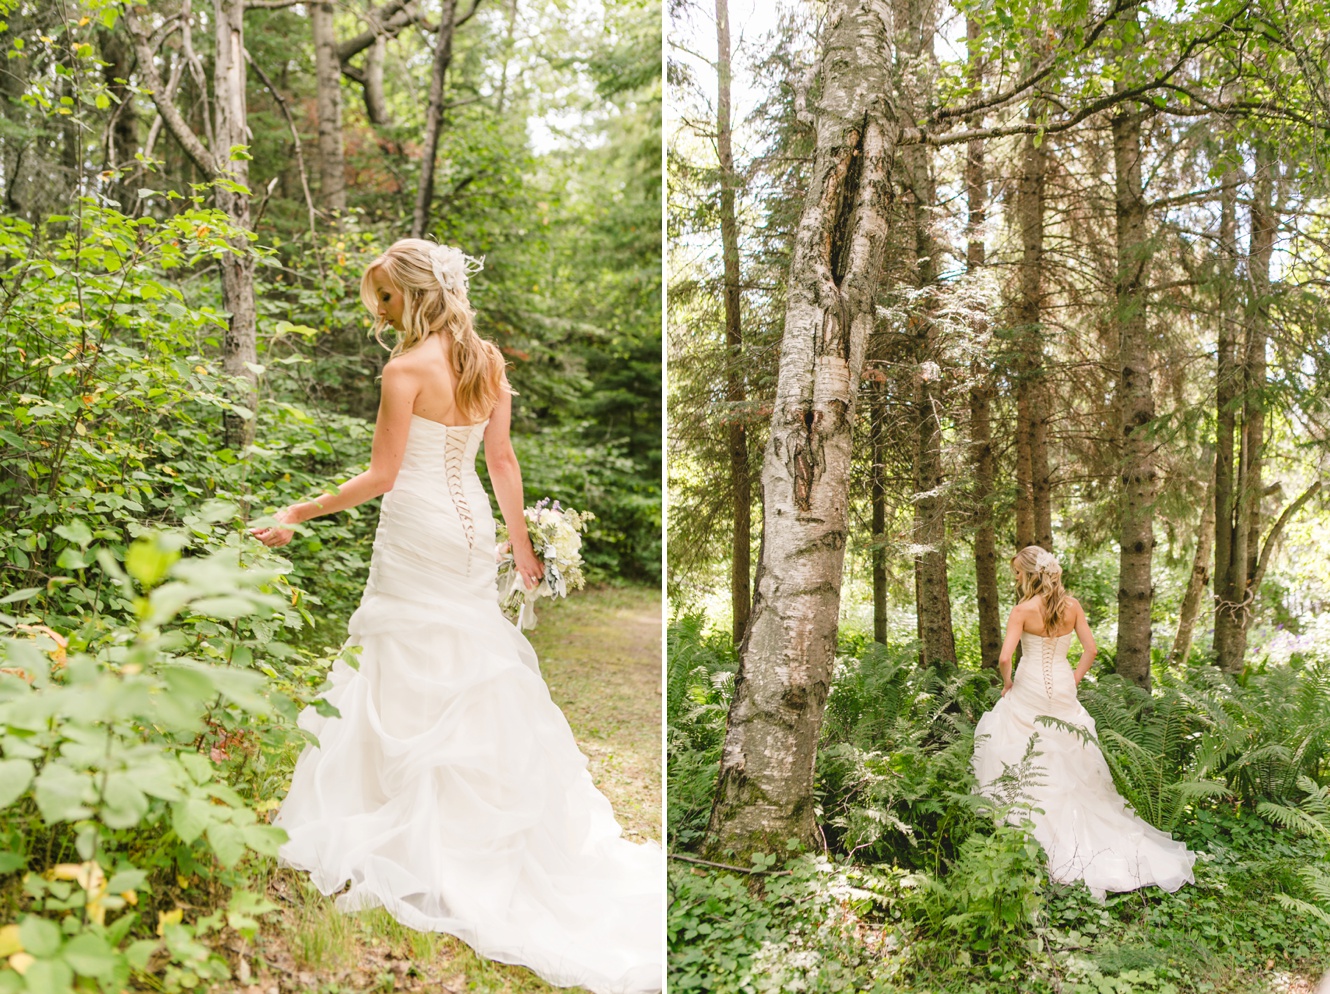 Beautiful fairytale bride in the woods photo